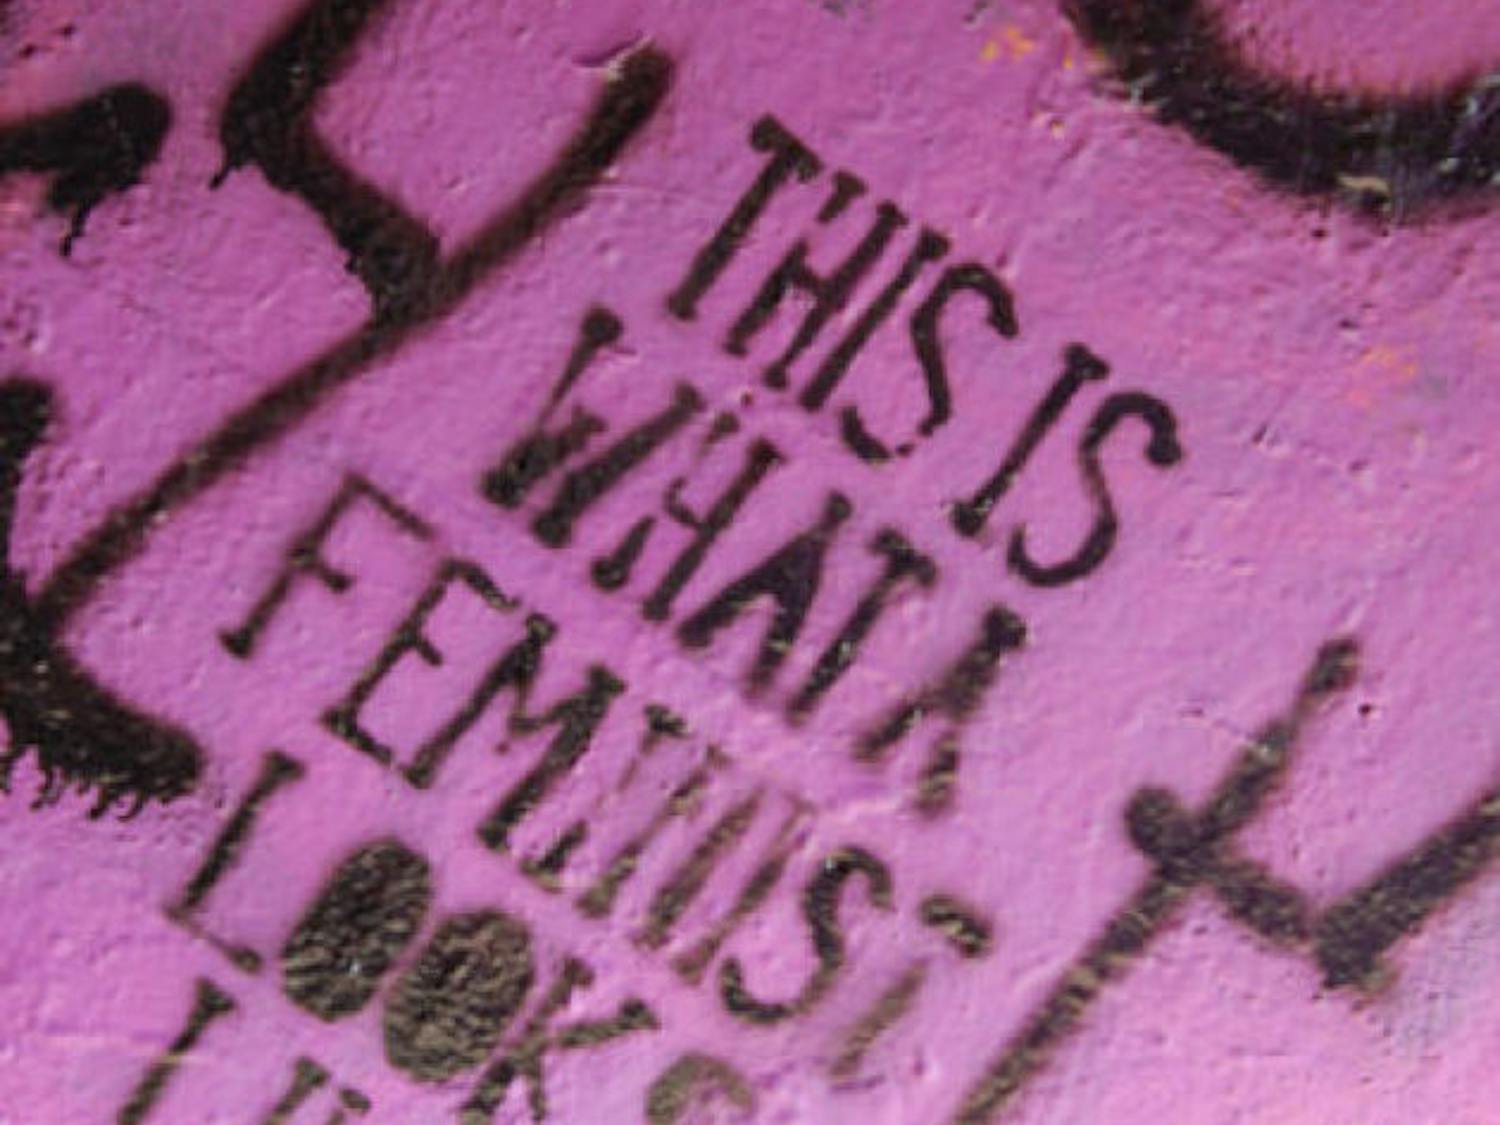 "Feminism or Vandalism?" by mbf2012, used under CC BY-NC-ND 2.0